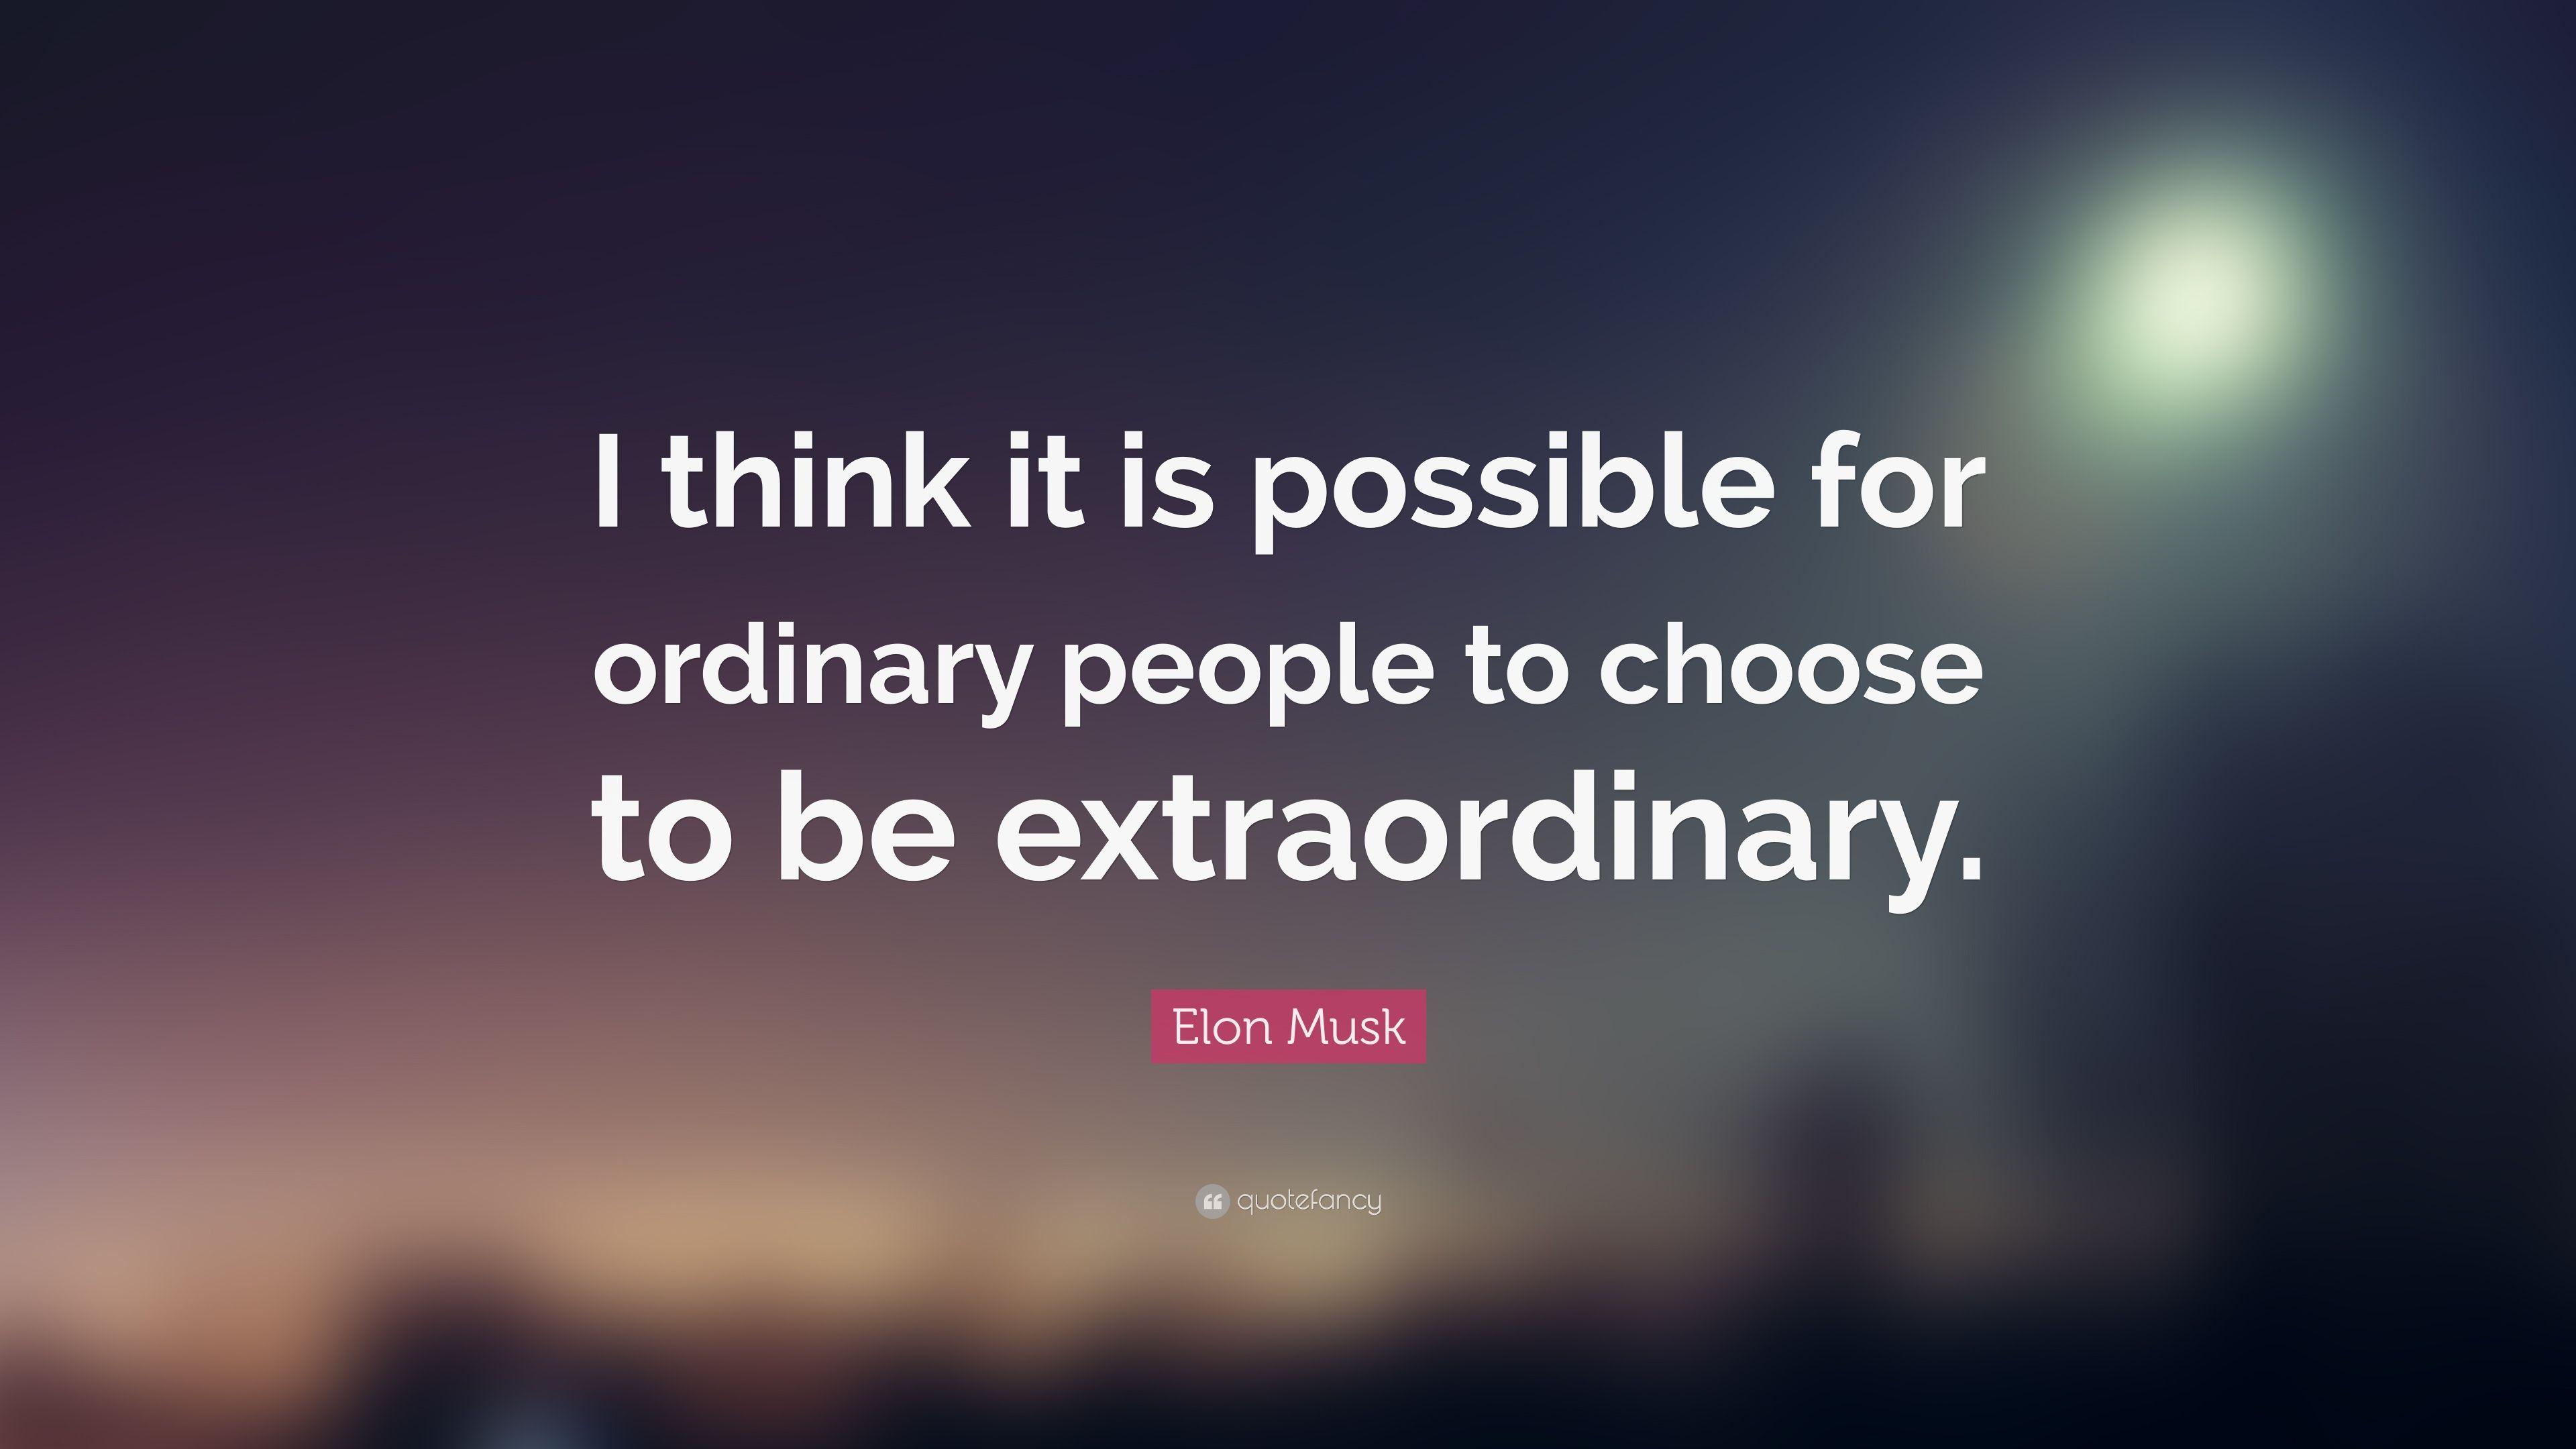 Elon Musk Quote: “I think it is possible for ordinary people to